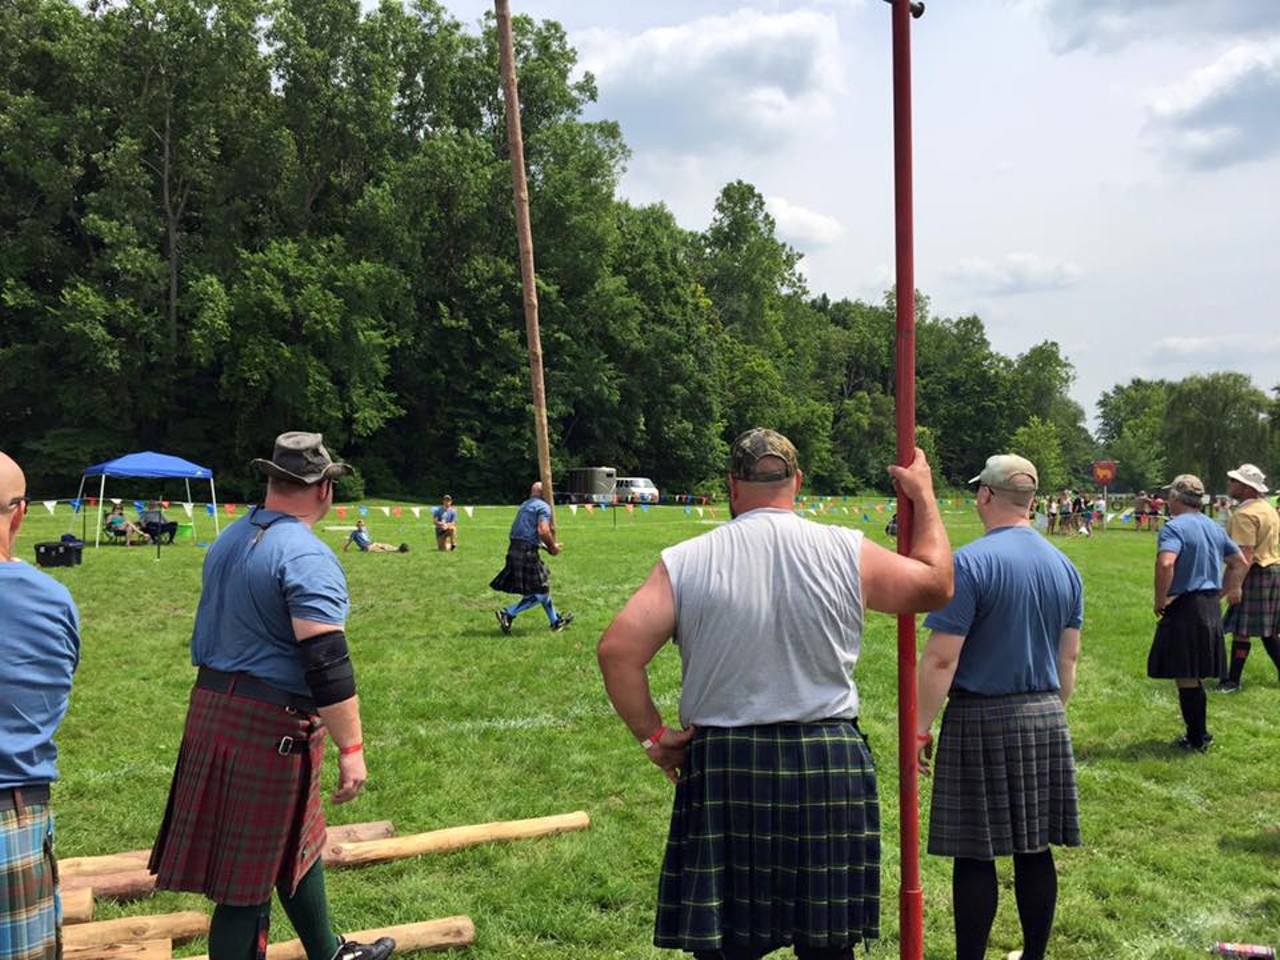  Saline Celtic Festival
When:  July 8-9
Where: Downtown Saline
What: All the fun of a renaissance festival, just add kilts! And bagpipes. And a weekend full of festivities celebrating the rich Celtic heritage of Saline, Michigan.  (Photo via Facebook)